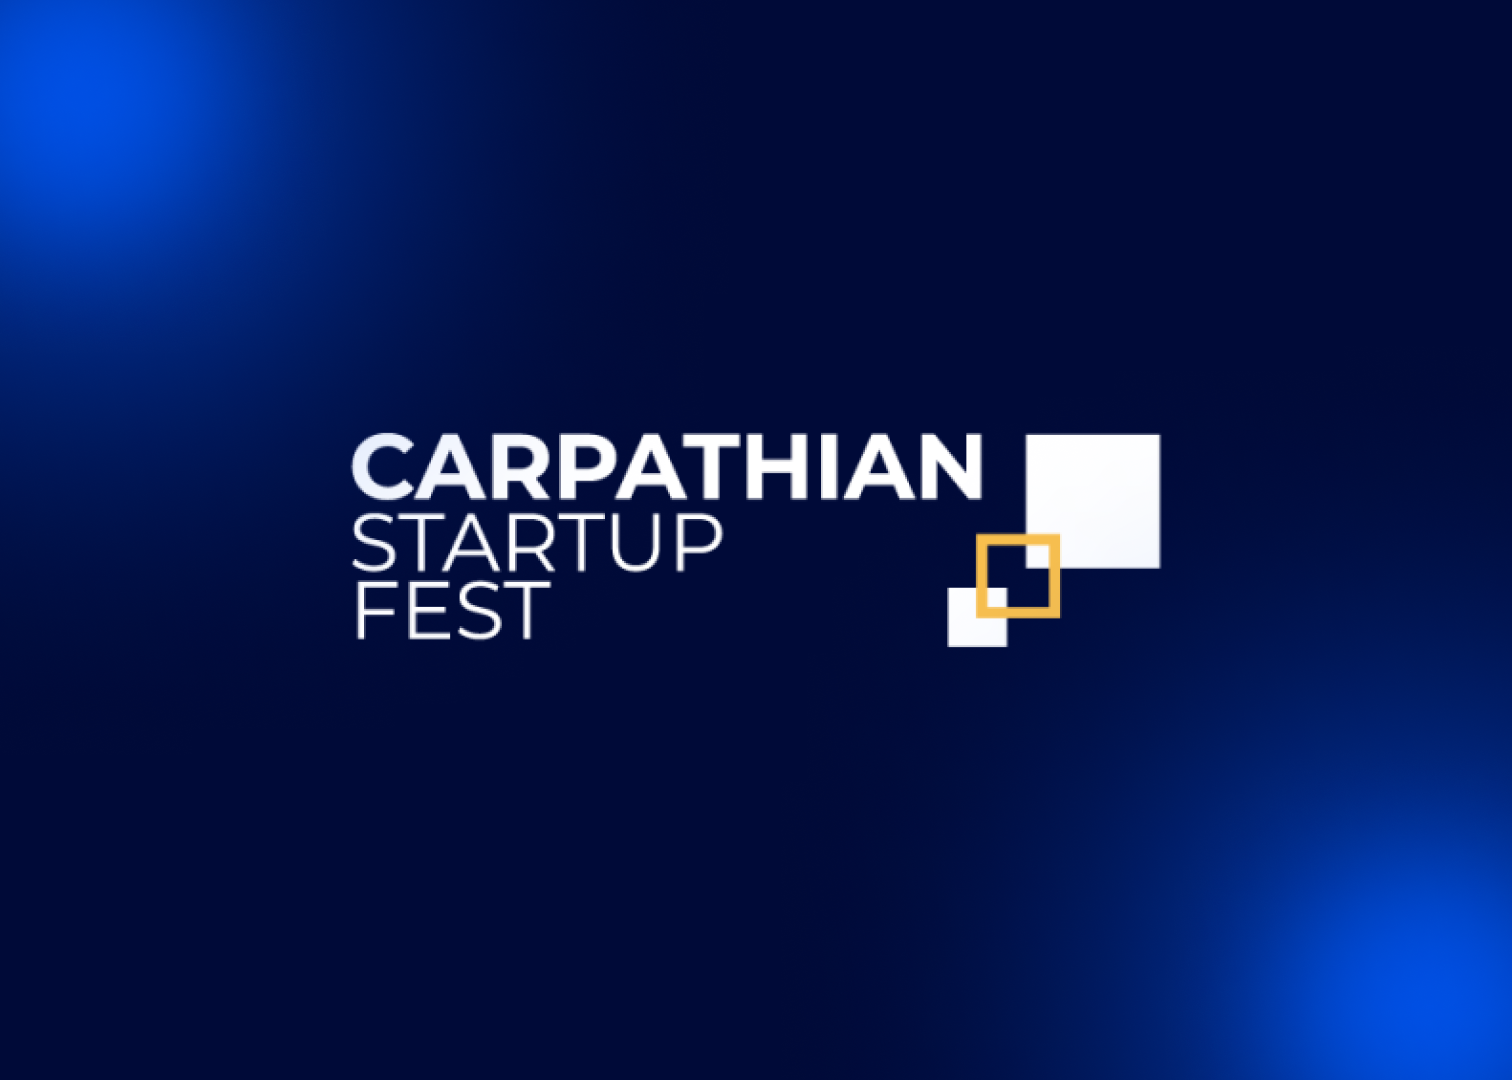 Carpathian Startup Fest streamlines the event organization process & improves the quality of networking with Gridaly